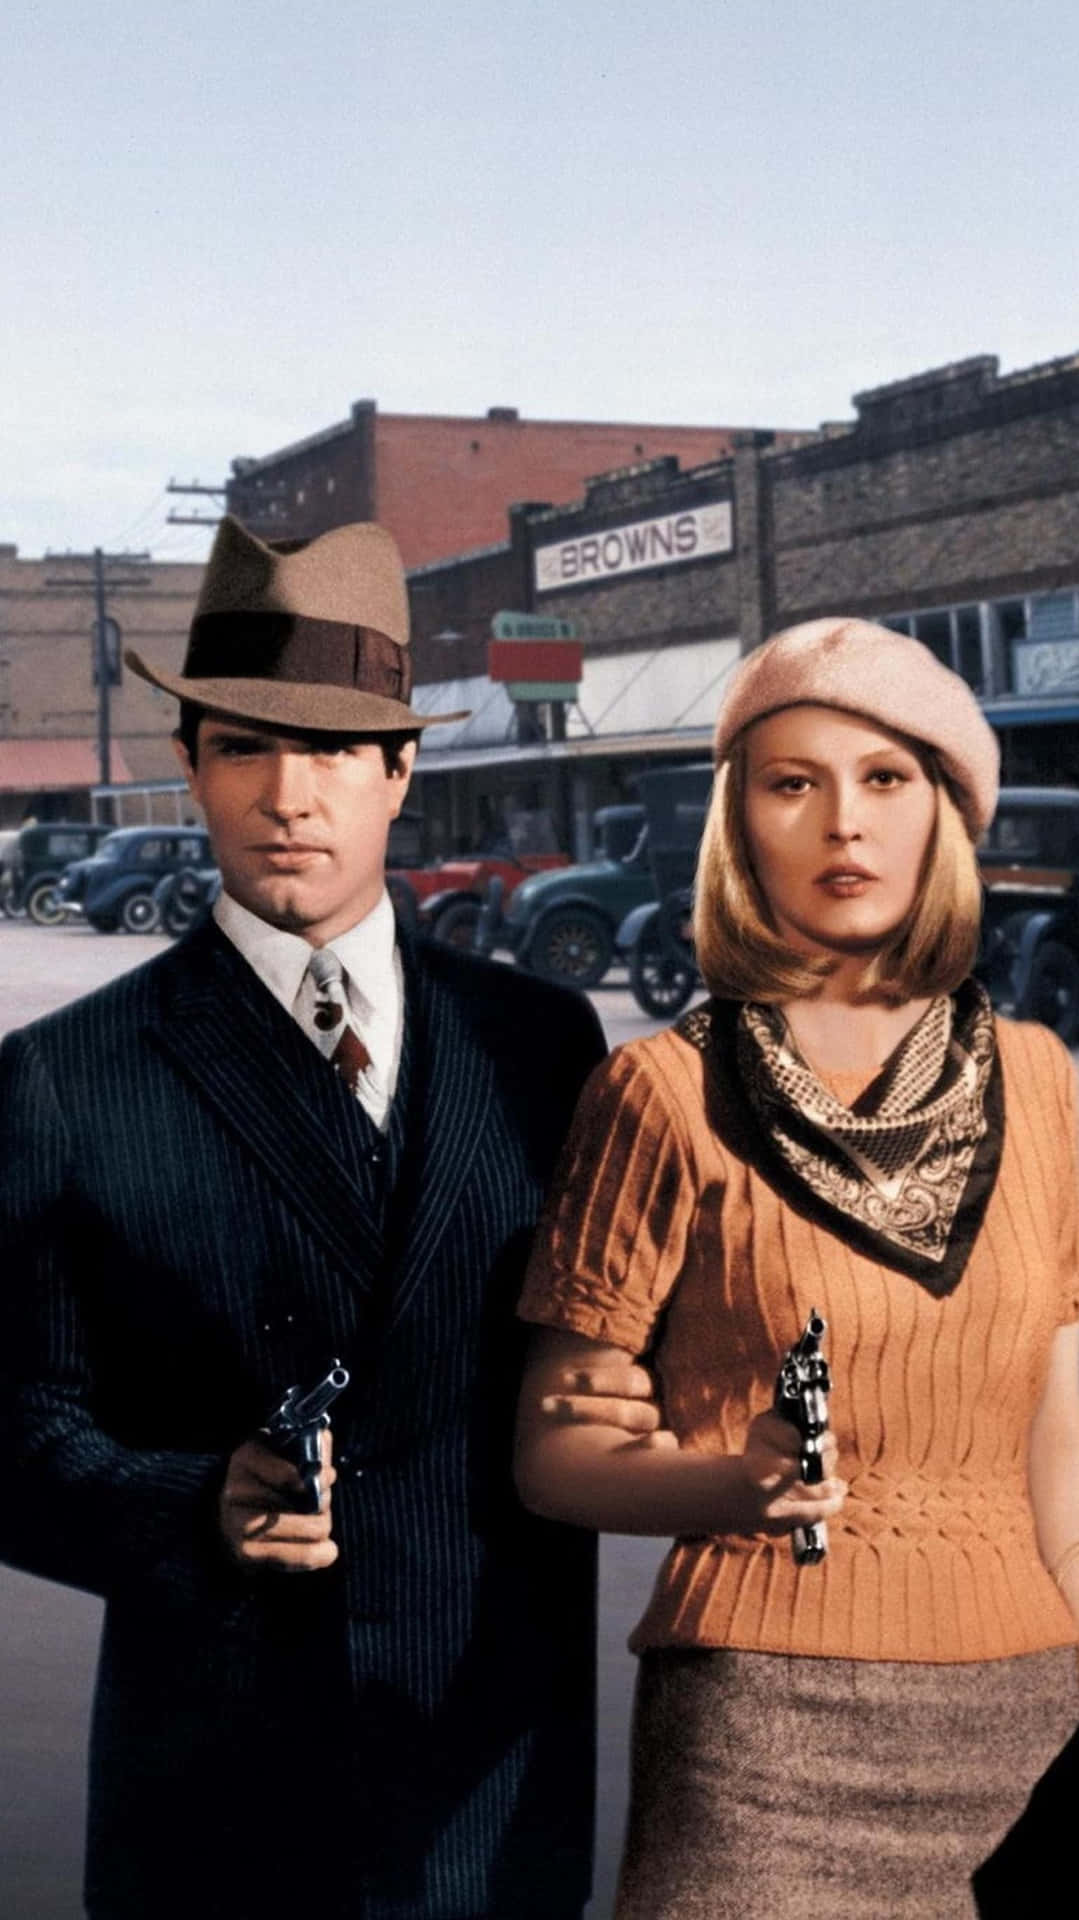 A Man And Woman Holding Guns In A Street